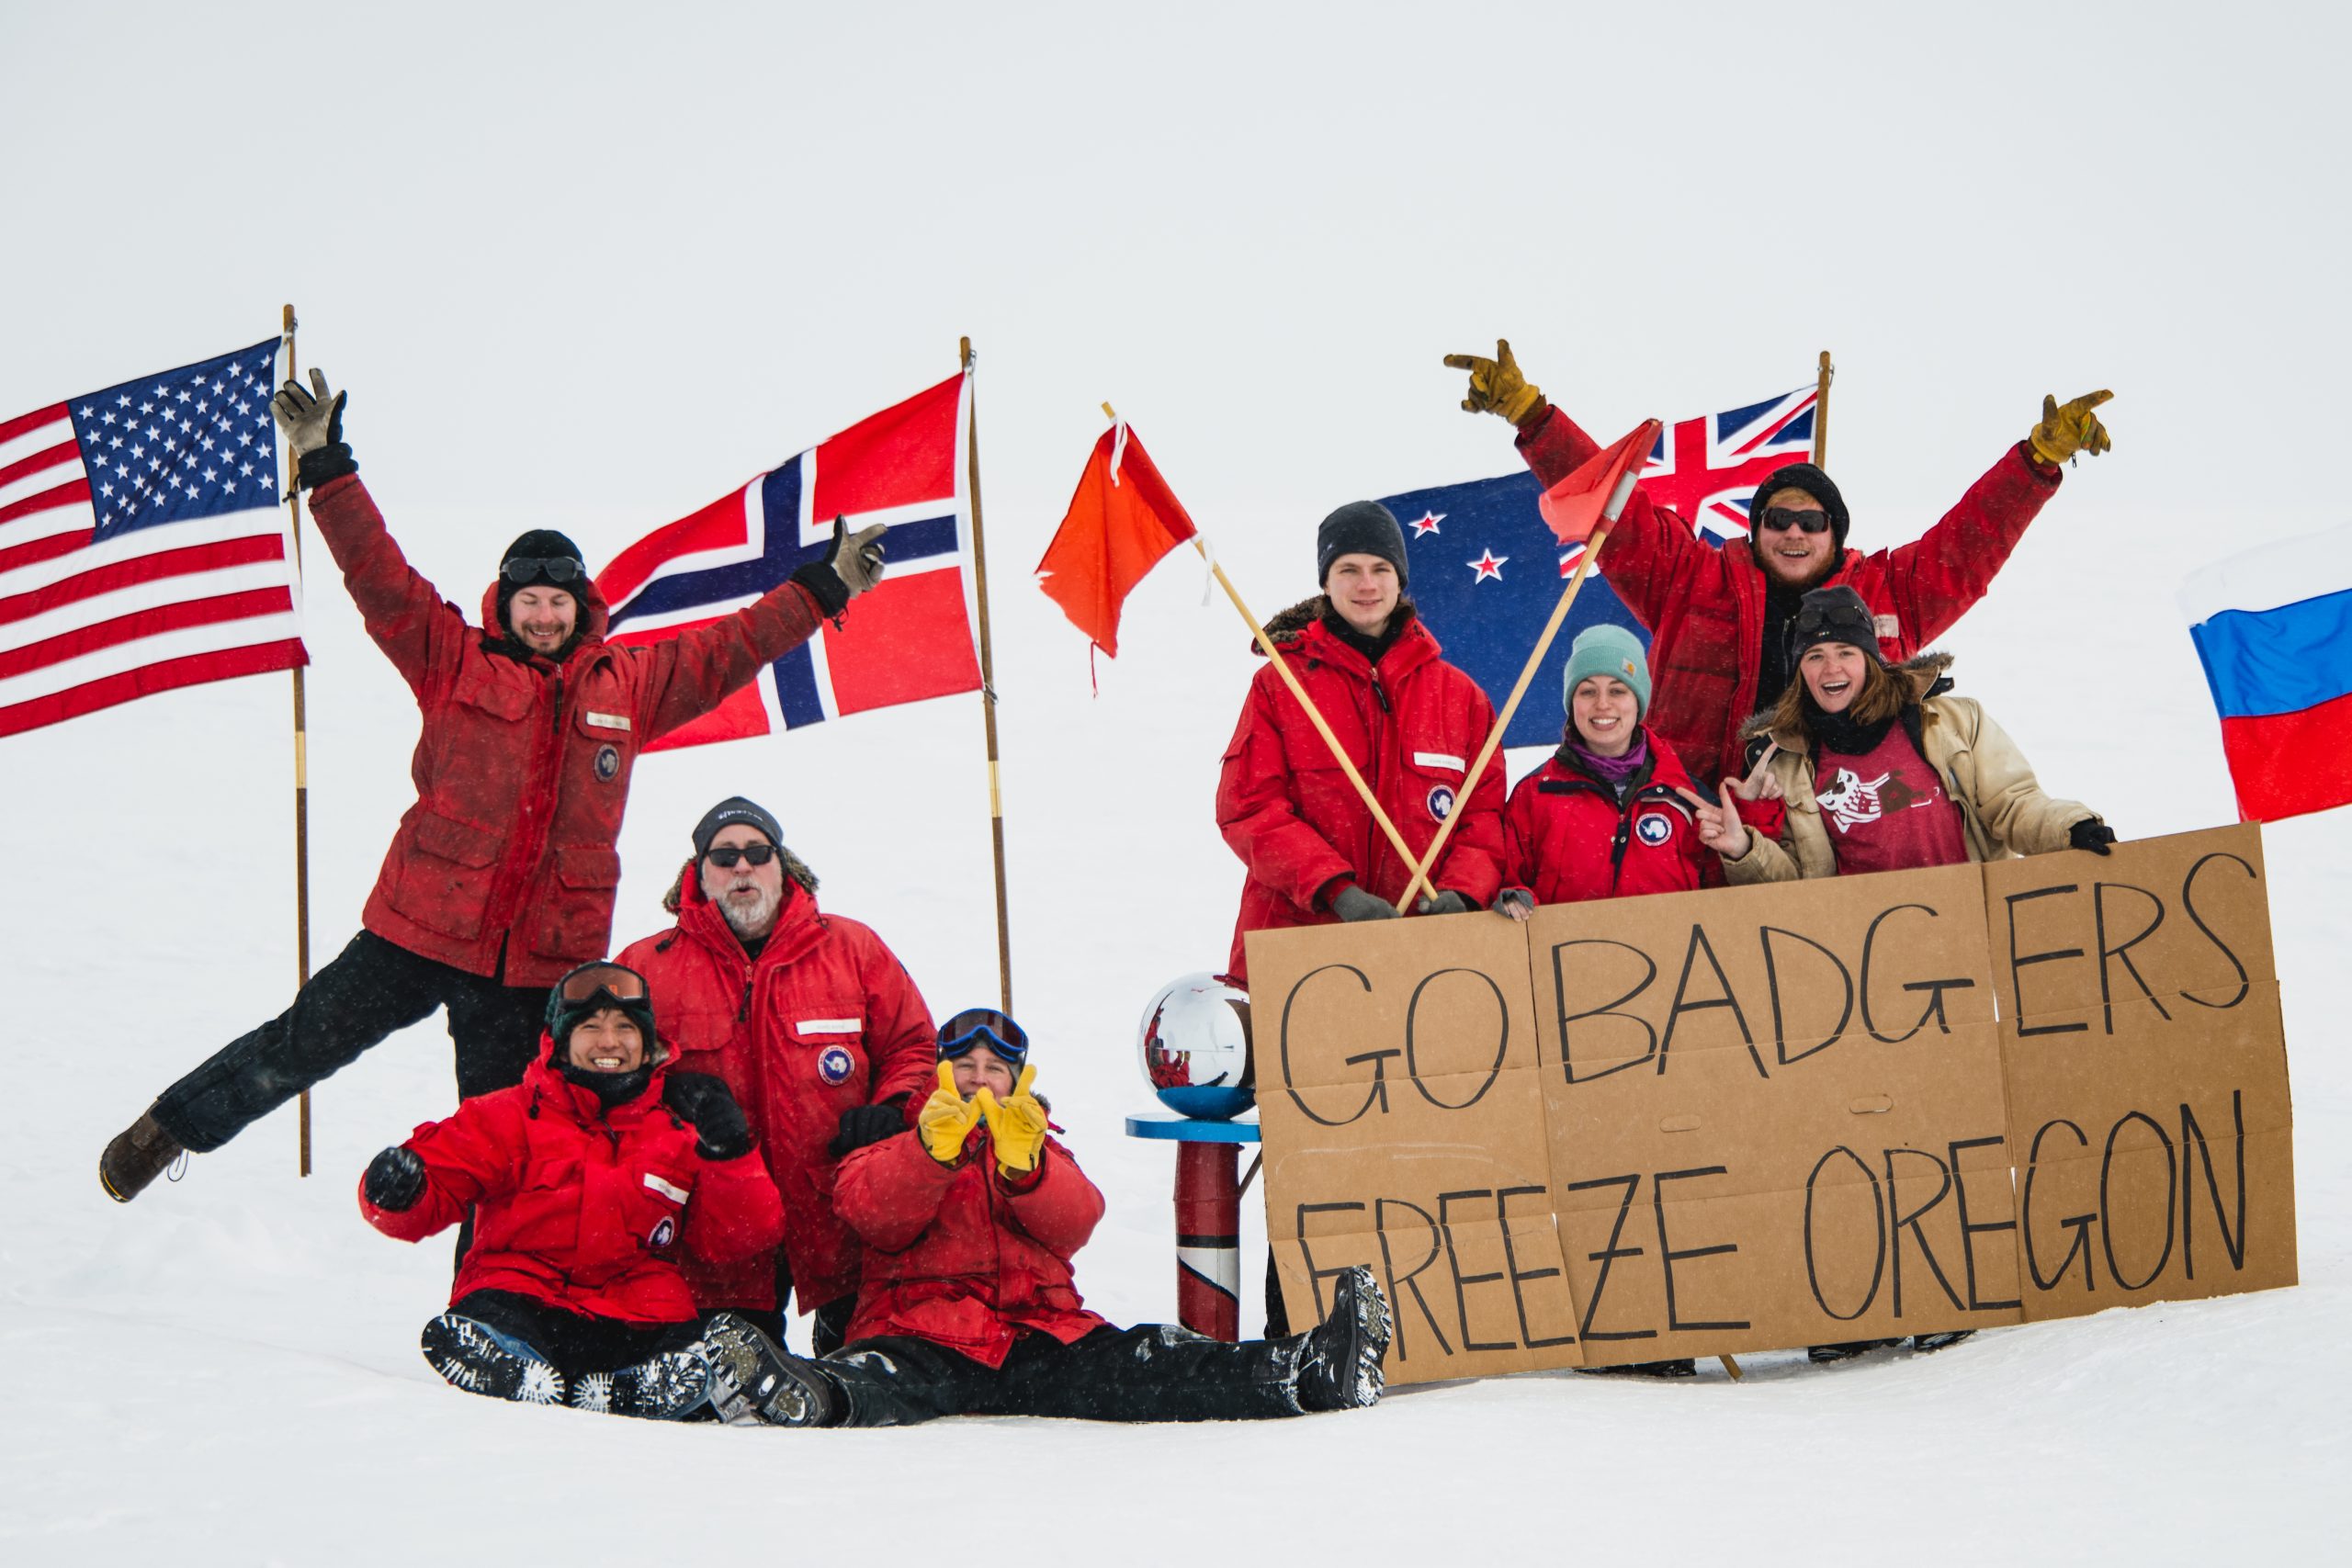 UW–Madison IceCube Laboratory researchers hold a sign that reads "Go Badgers, Freeze Oregon"